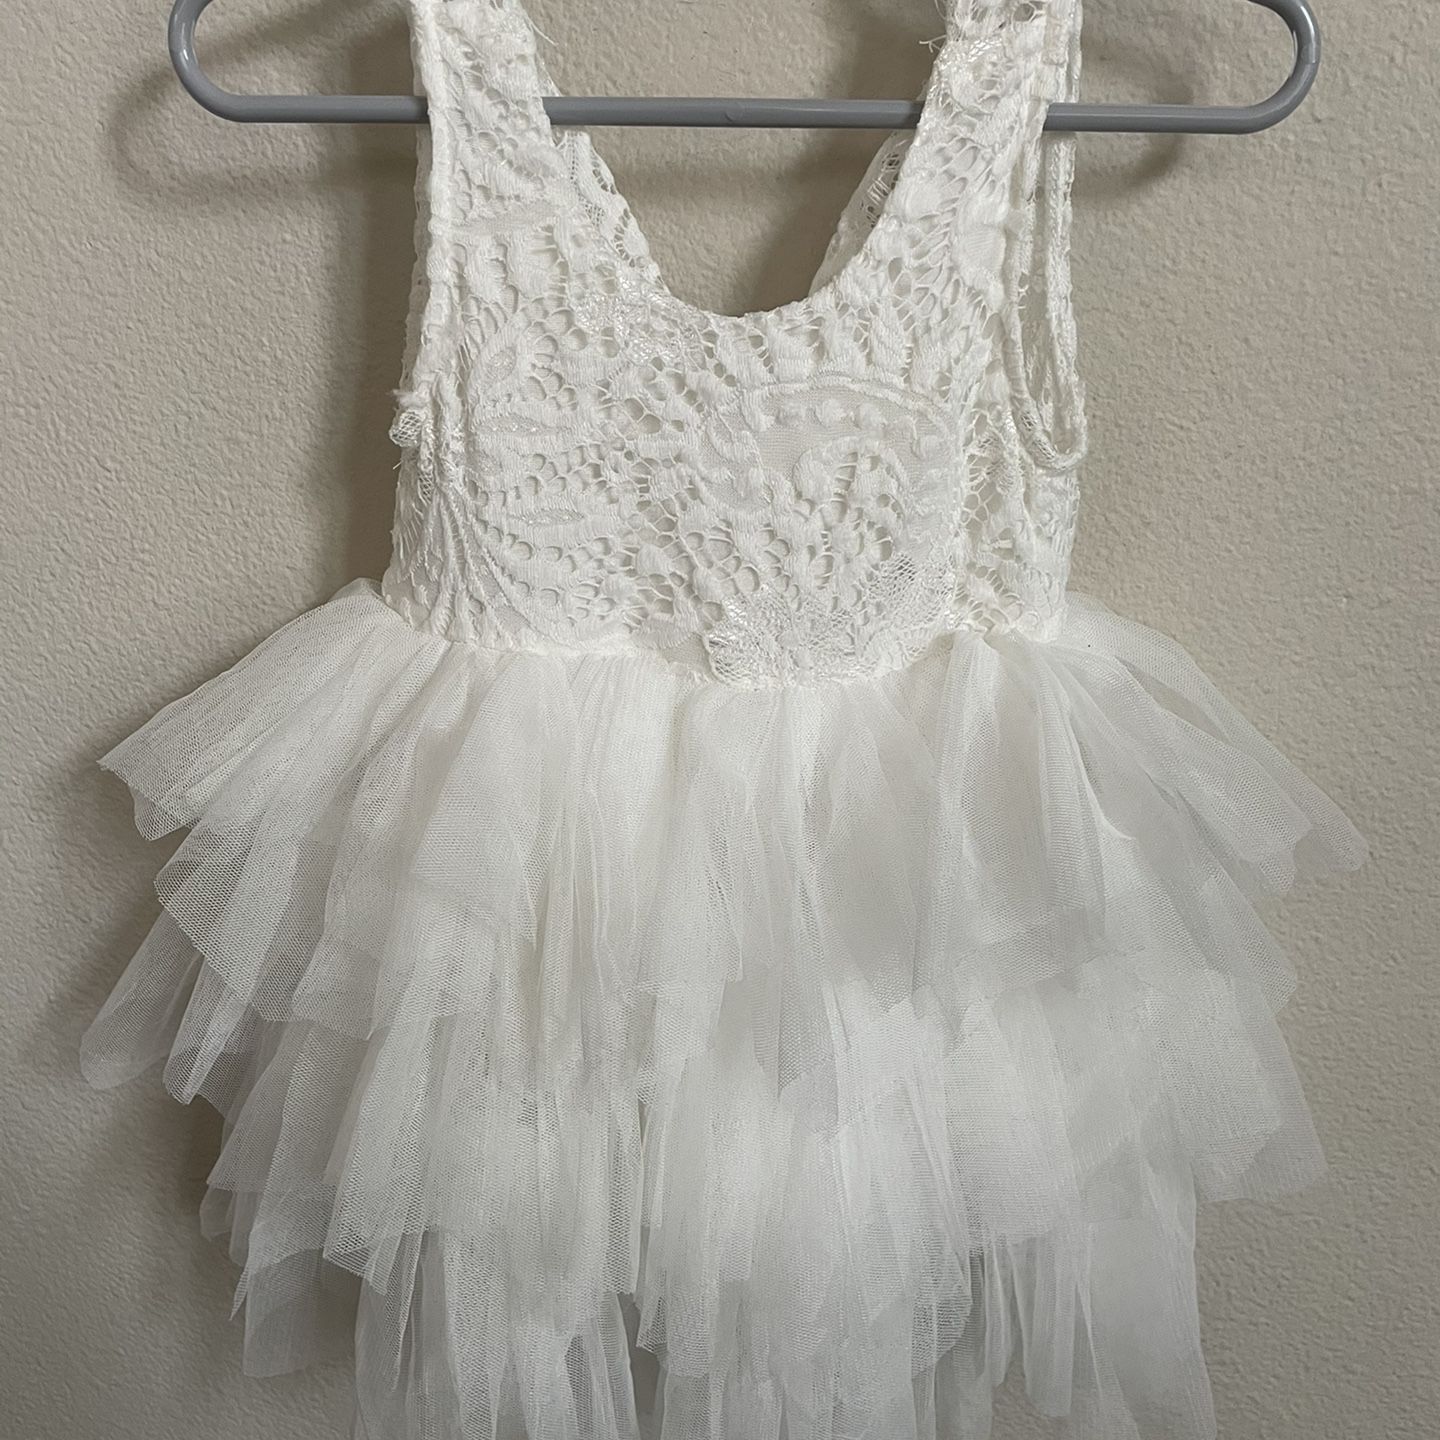 6-12 Month Size Beautiful Backless A-Line Lace Back Flower Girl Or First Birthday Dress